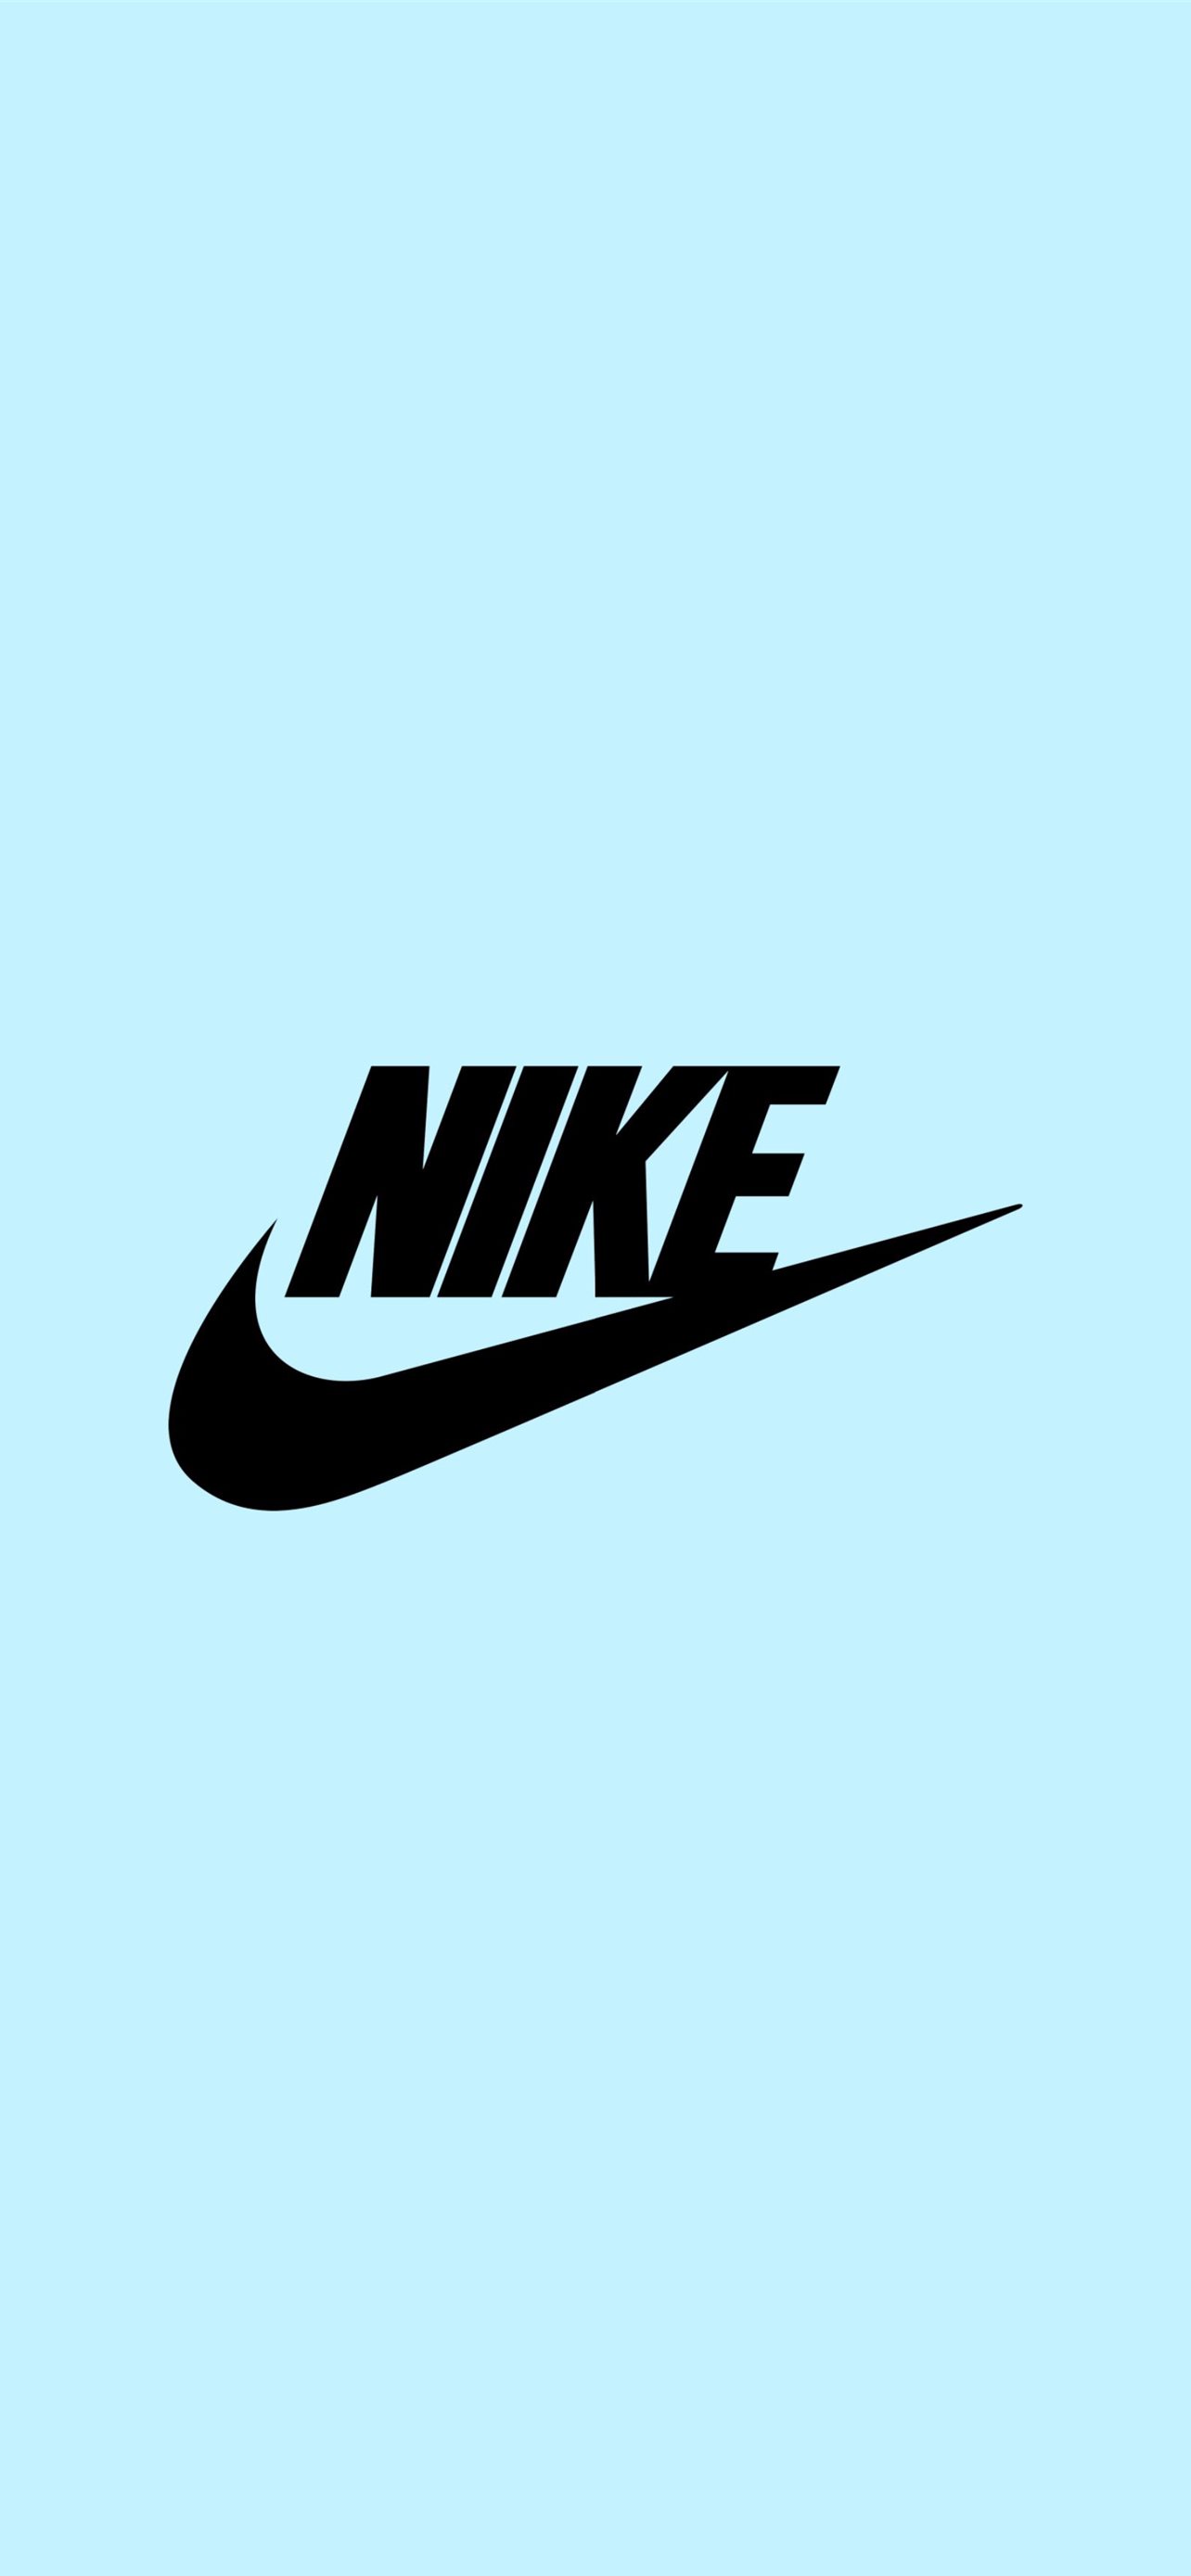 NIKE JUST DO IT COOL STYLE SHOES WALLPAPER FOR IPHONE